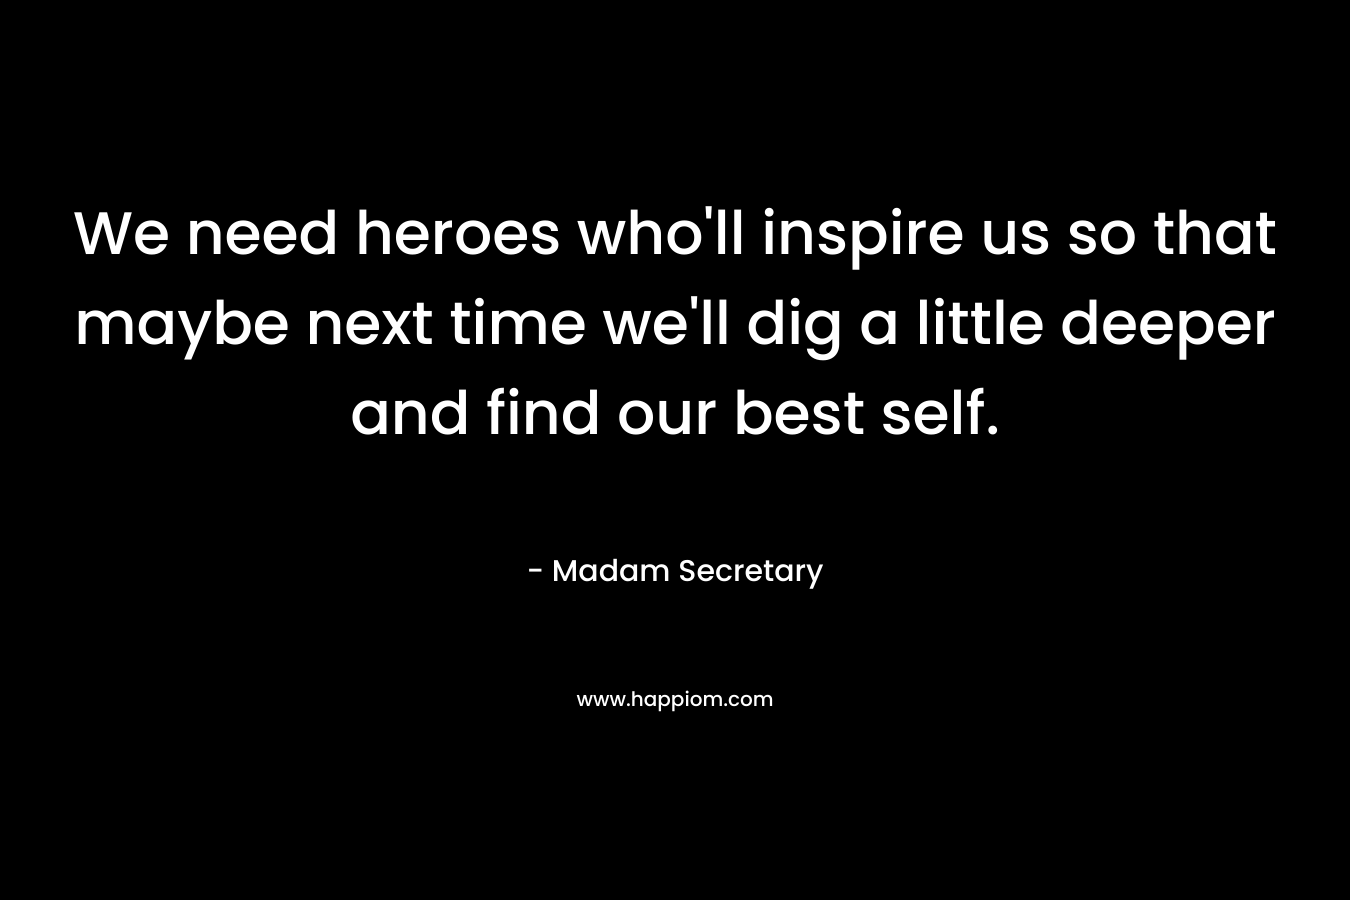 We need heroes who’ll inspire us so that maybe next time we’ll dig a little deeper and find our best self. – Madam Secretary